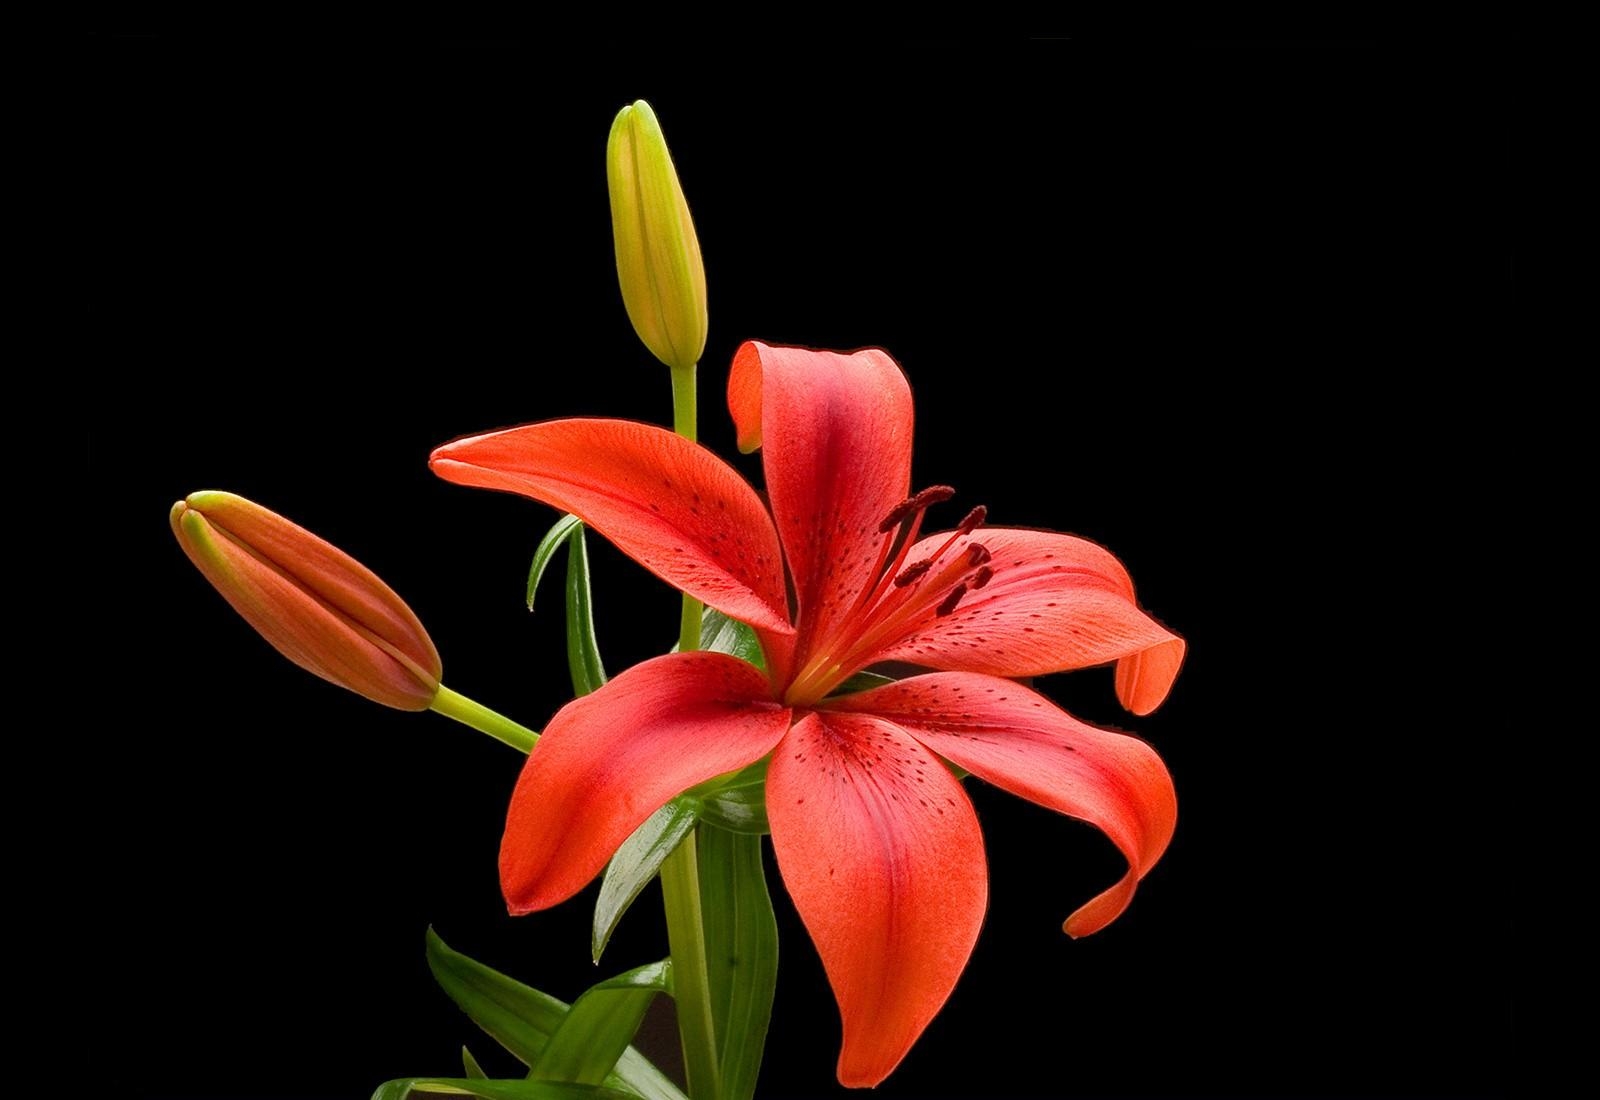 high quality red lily rose image